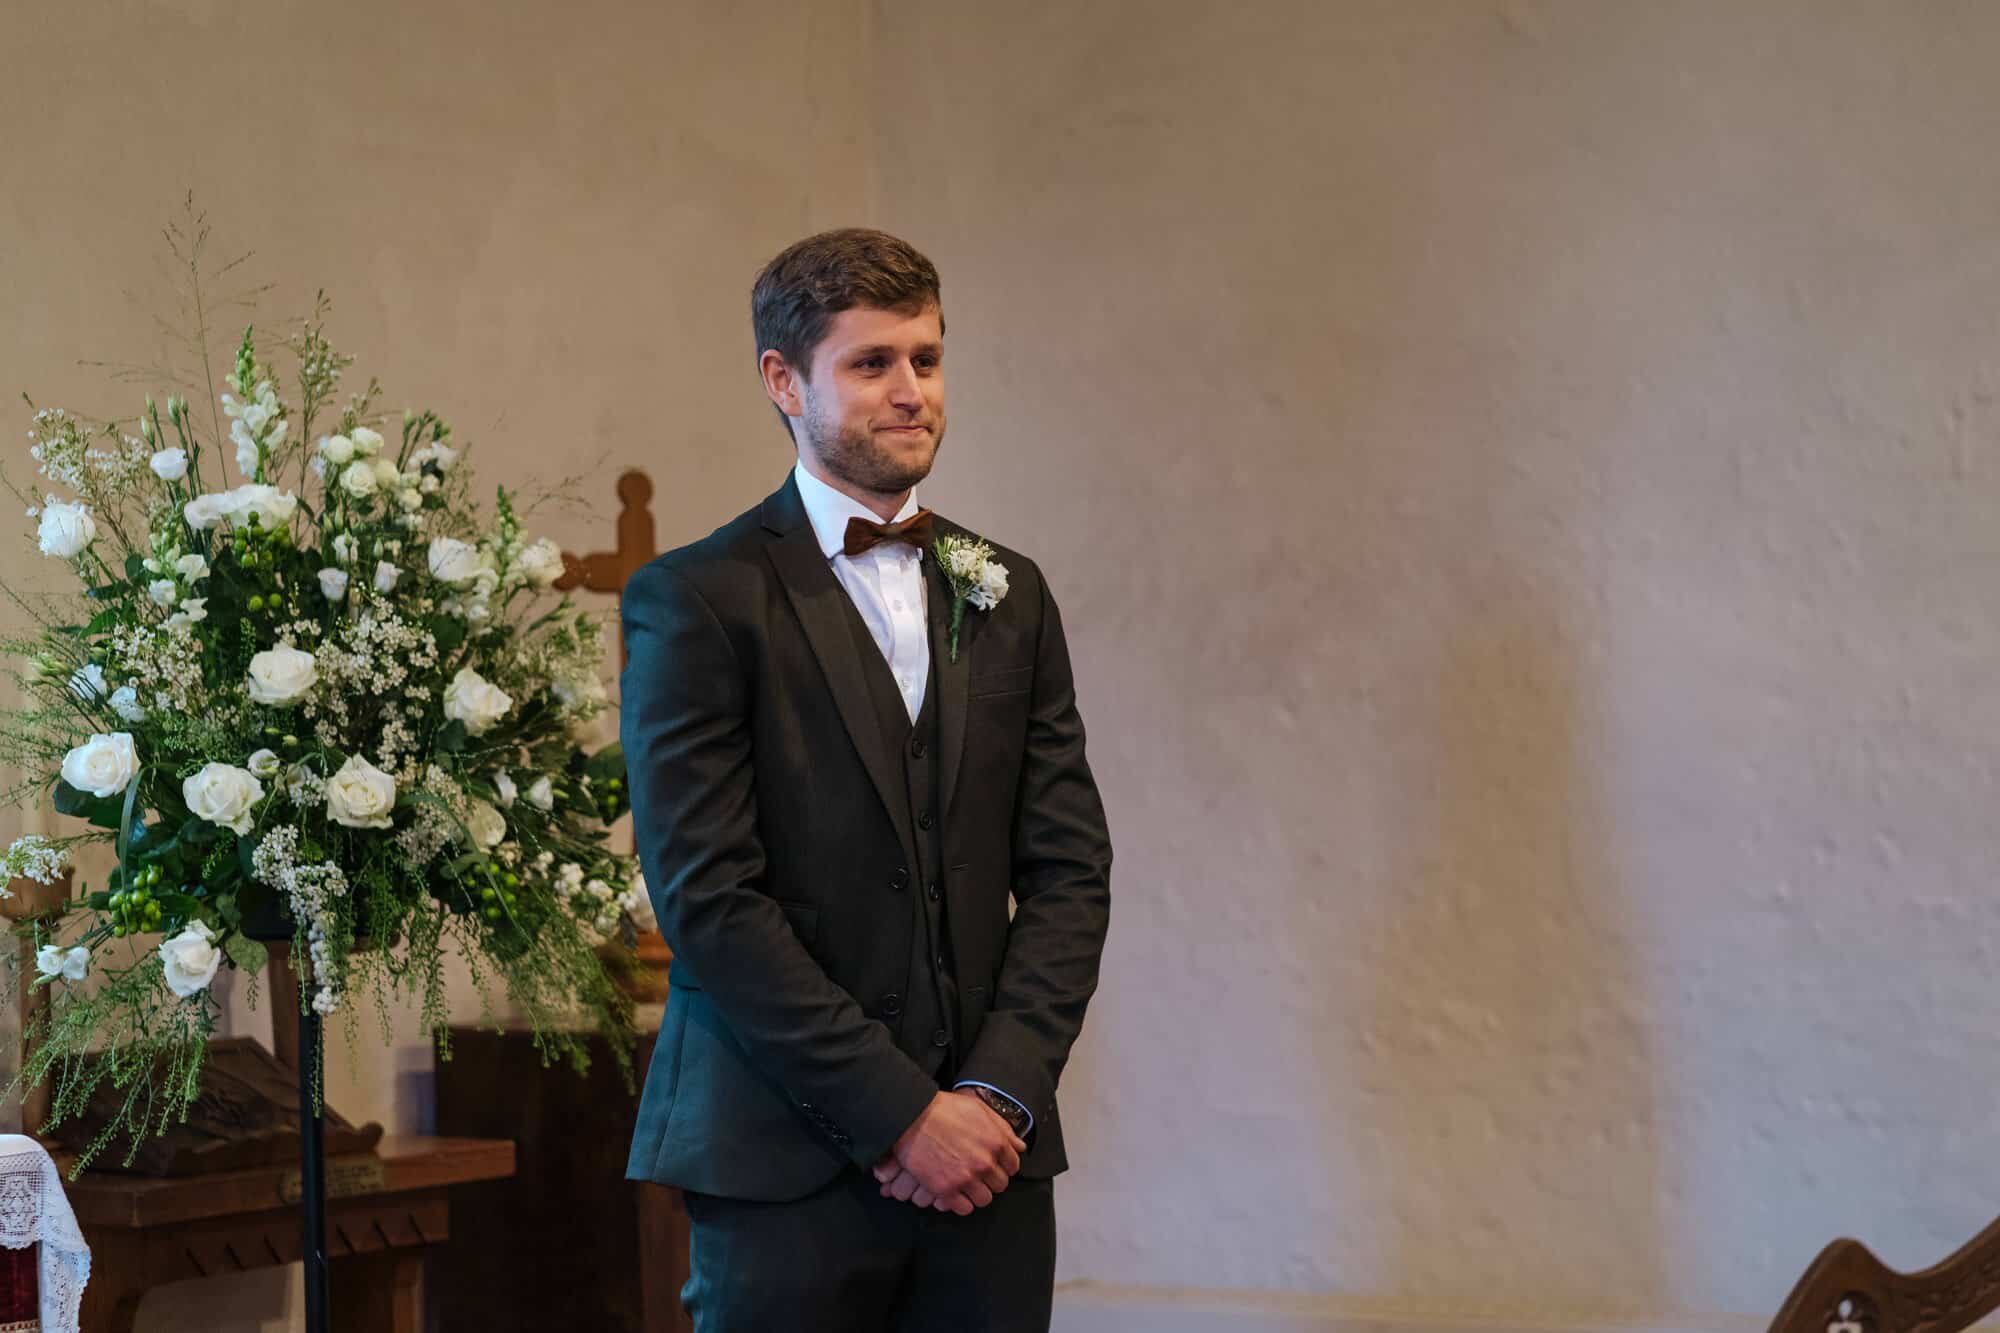 Groom waiting for his bride at church